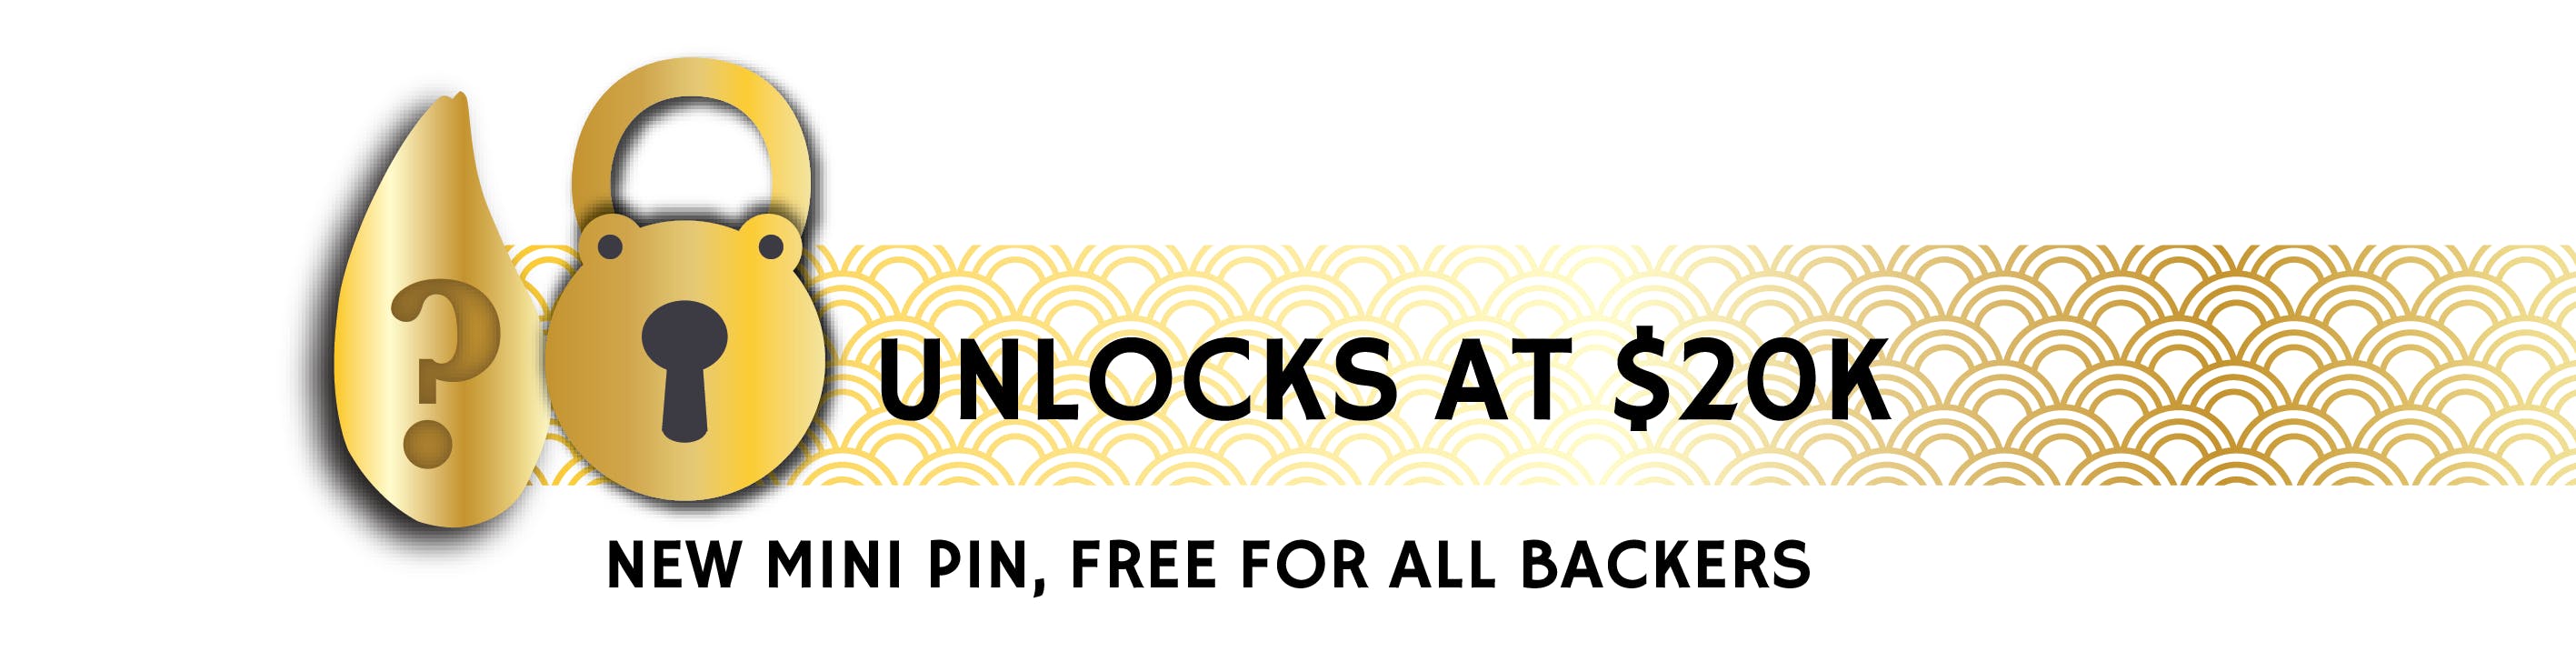 Stretch Goal #7: Unlock a Free mini pin for all Backers